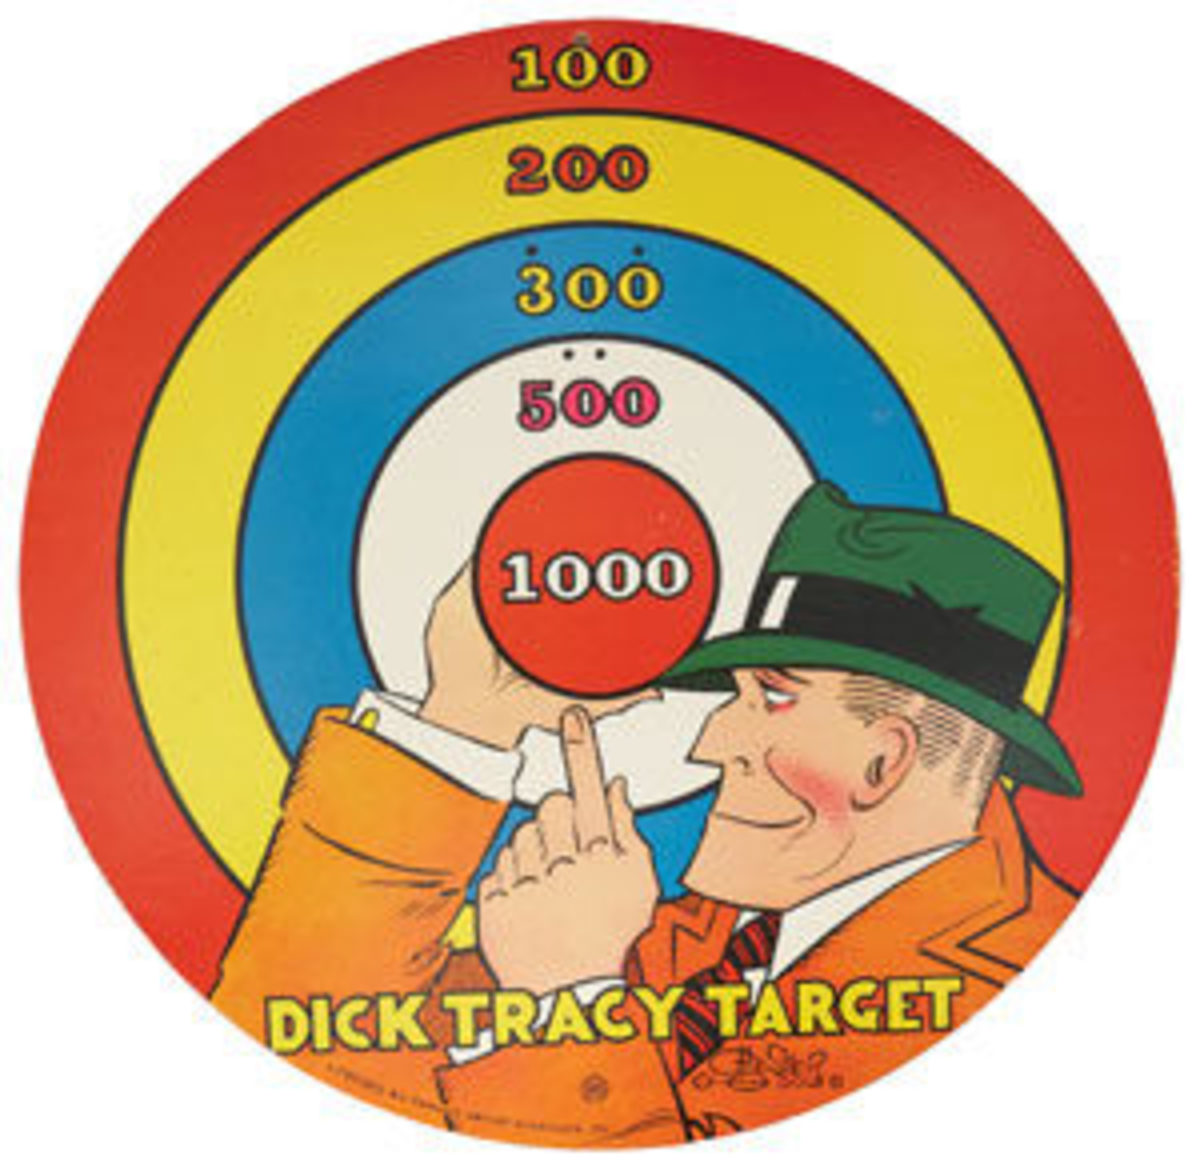  Dick Tracy Target, 1930s.Image courtesy of Heritage Auctions